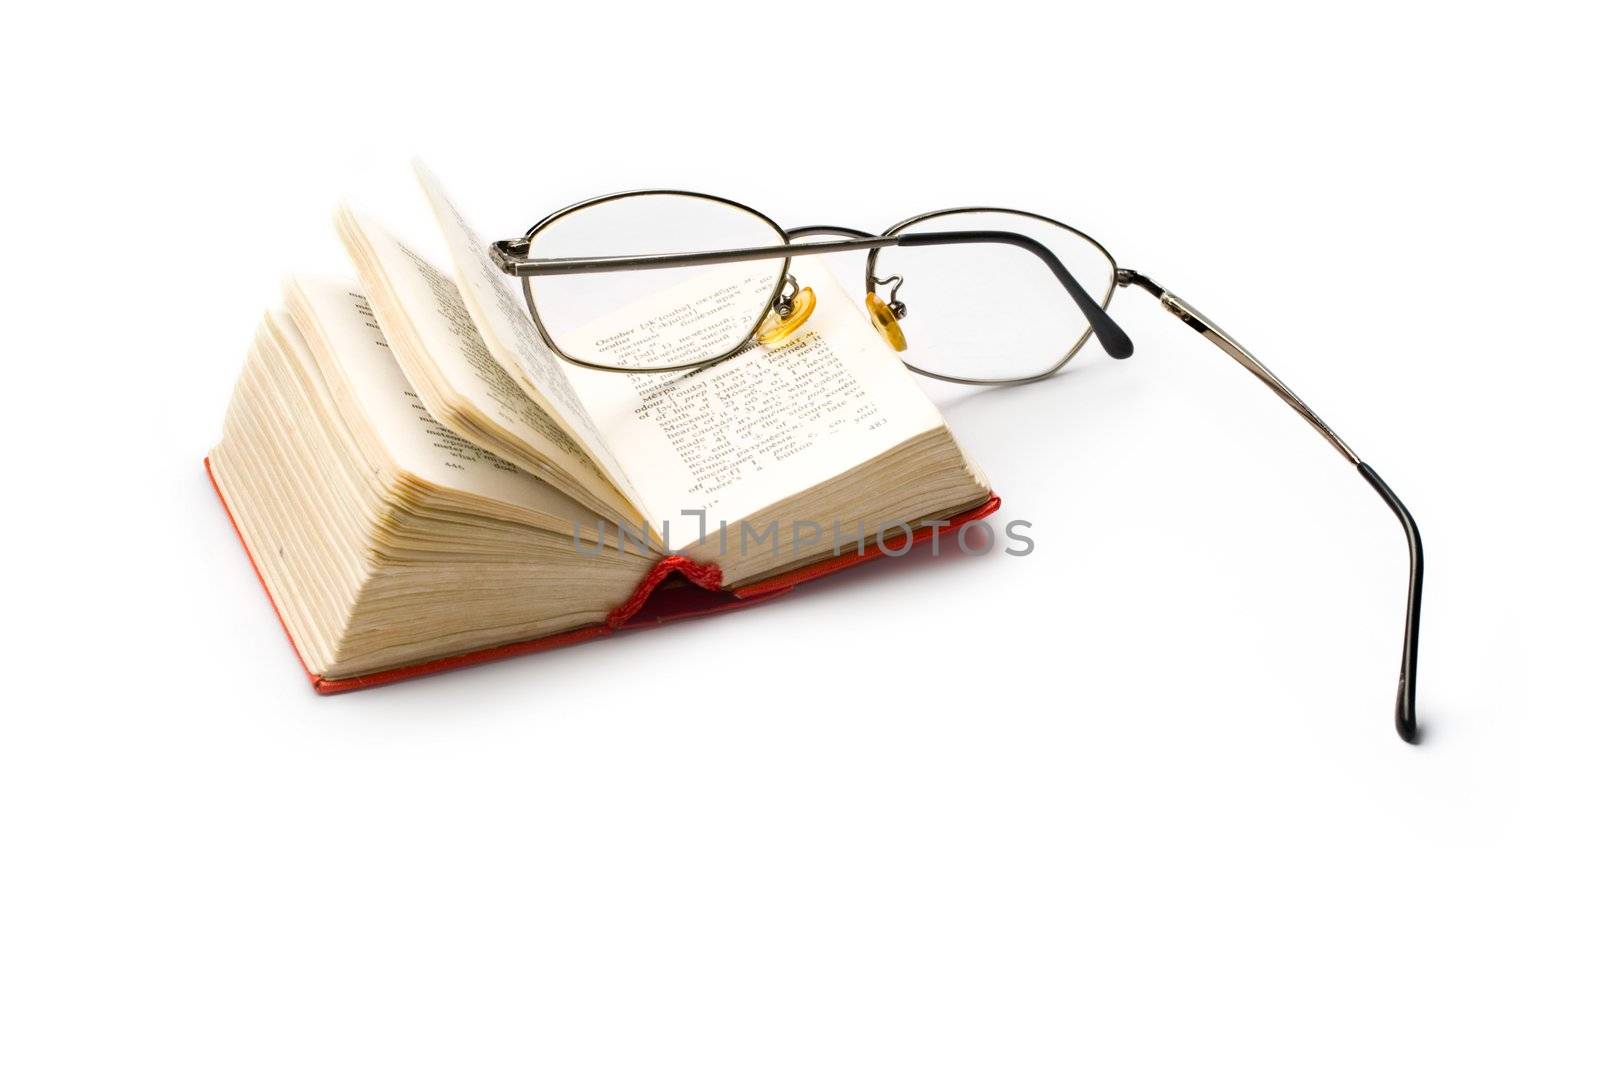 Book and glasses isolated on white